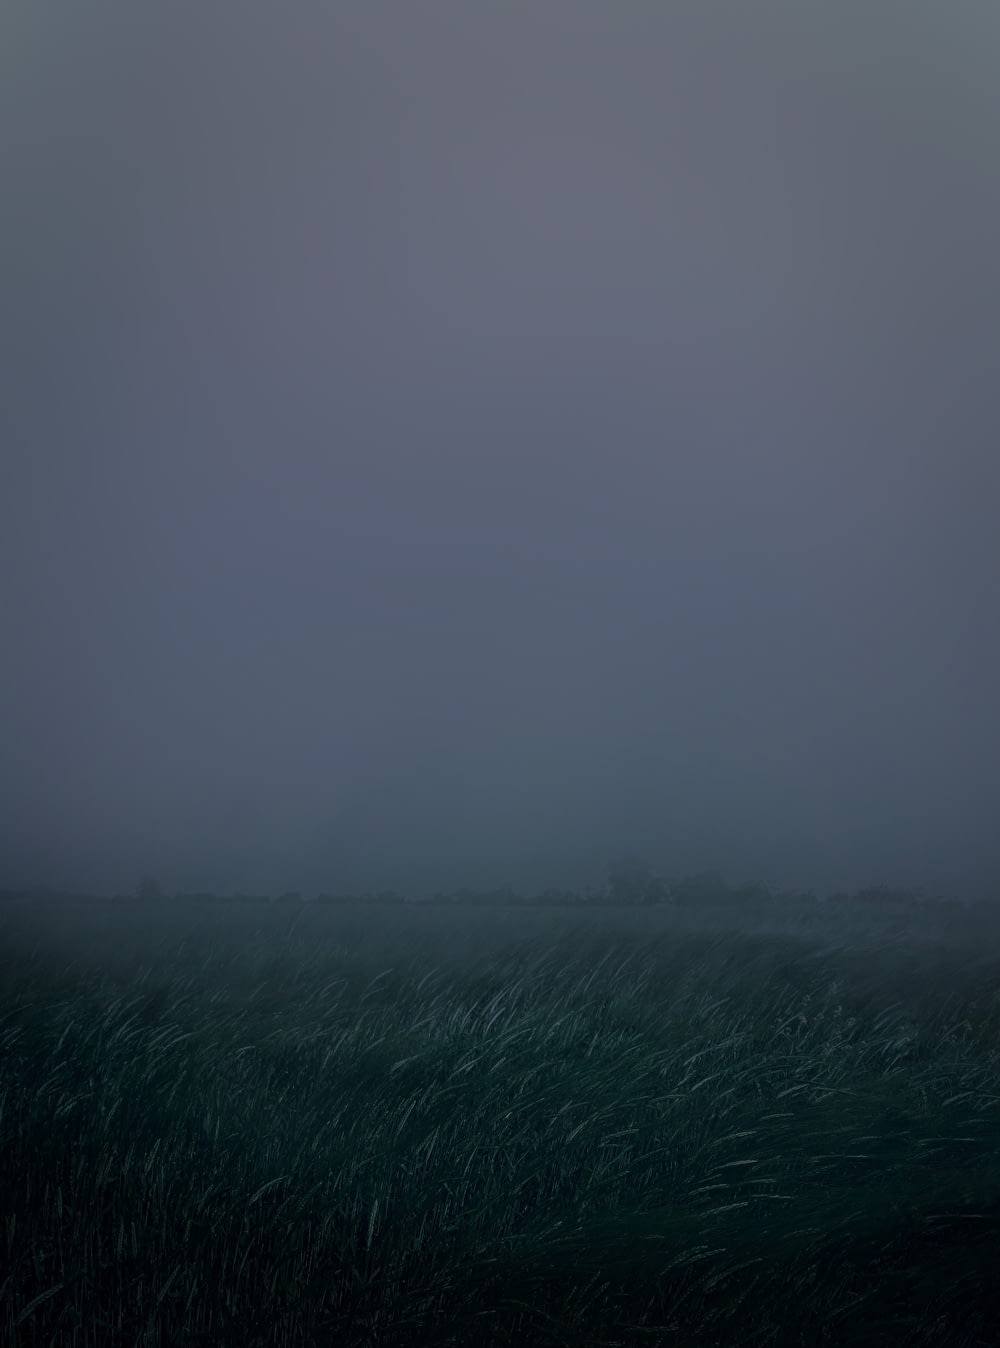 green grass field covered with fog